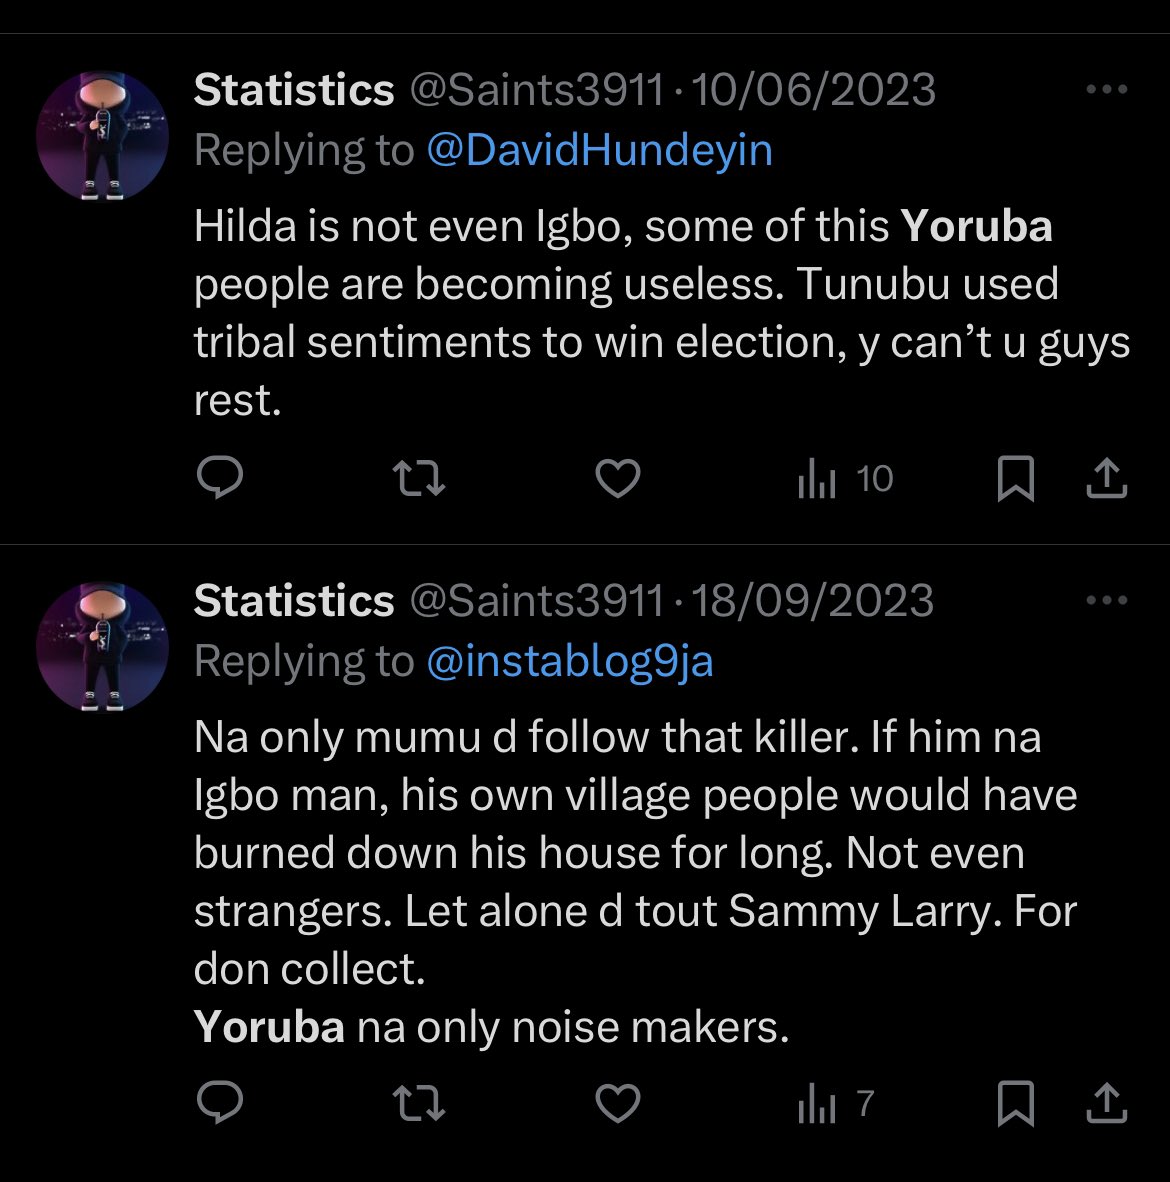 @Saints3911 @metuchizzy Lol playing the victim huh.. I see say you love Yoruba too.. Yall start the hate when they give you back you play the victim.. 

What you say about Yorubas here 👇👇 is love right.. Not hate